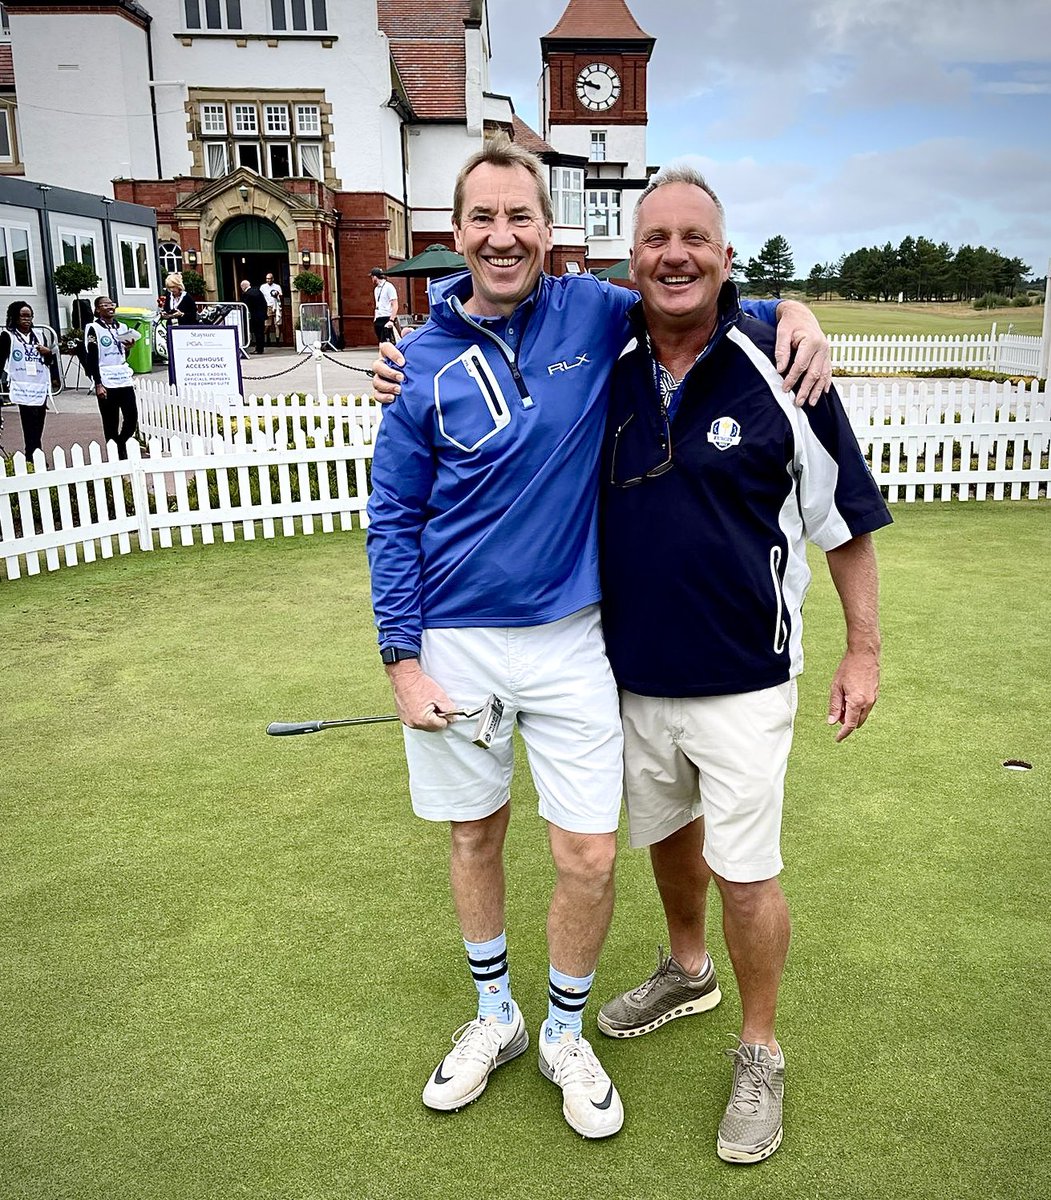 Long time caddying colleagues in the same group @FormbyGolfClub in PGA Seniors but one of them is playing..!! Give you a clue…it’s not @gottothetopat51 good to see John McLaren on the other end of the bag. Ex @Paul_Casey and @LukeDonald #johnnylongsocksmclaren